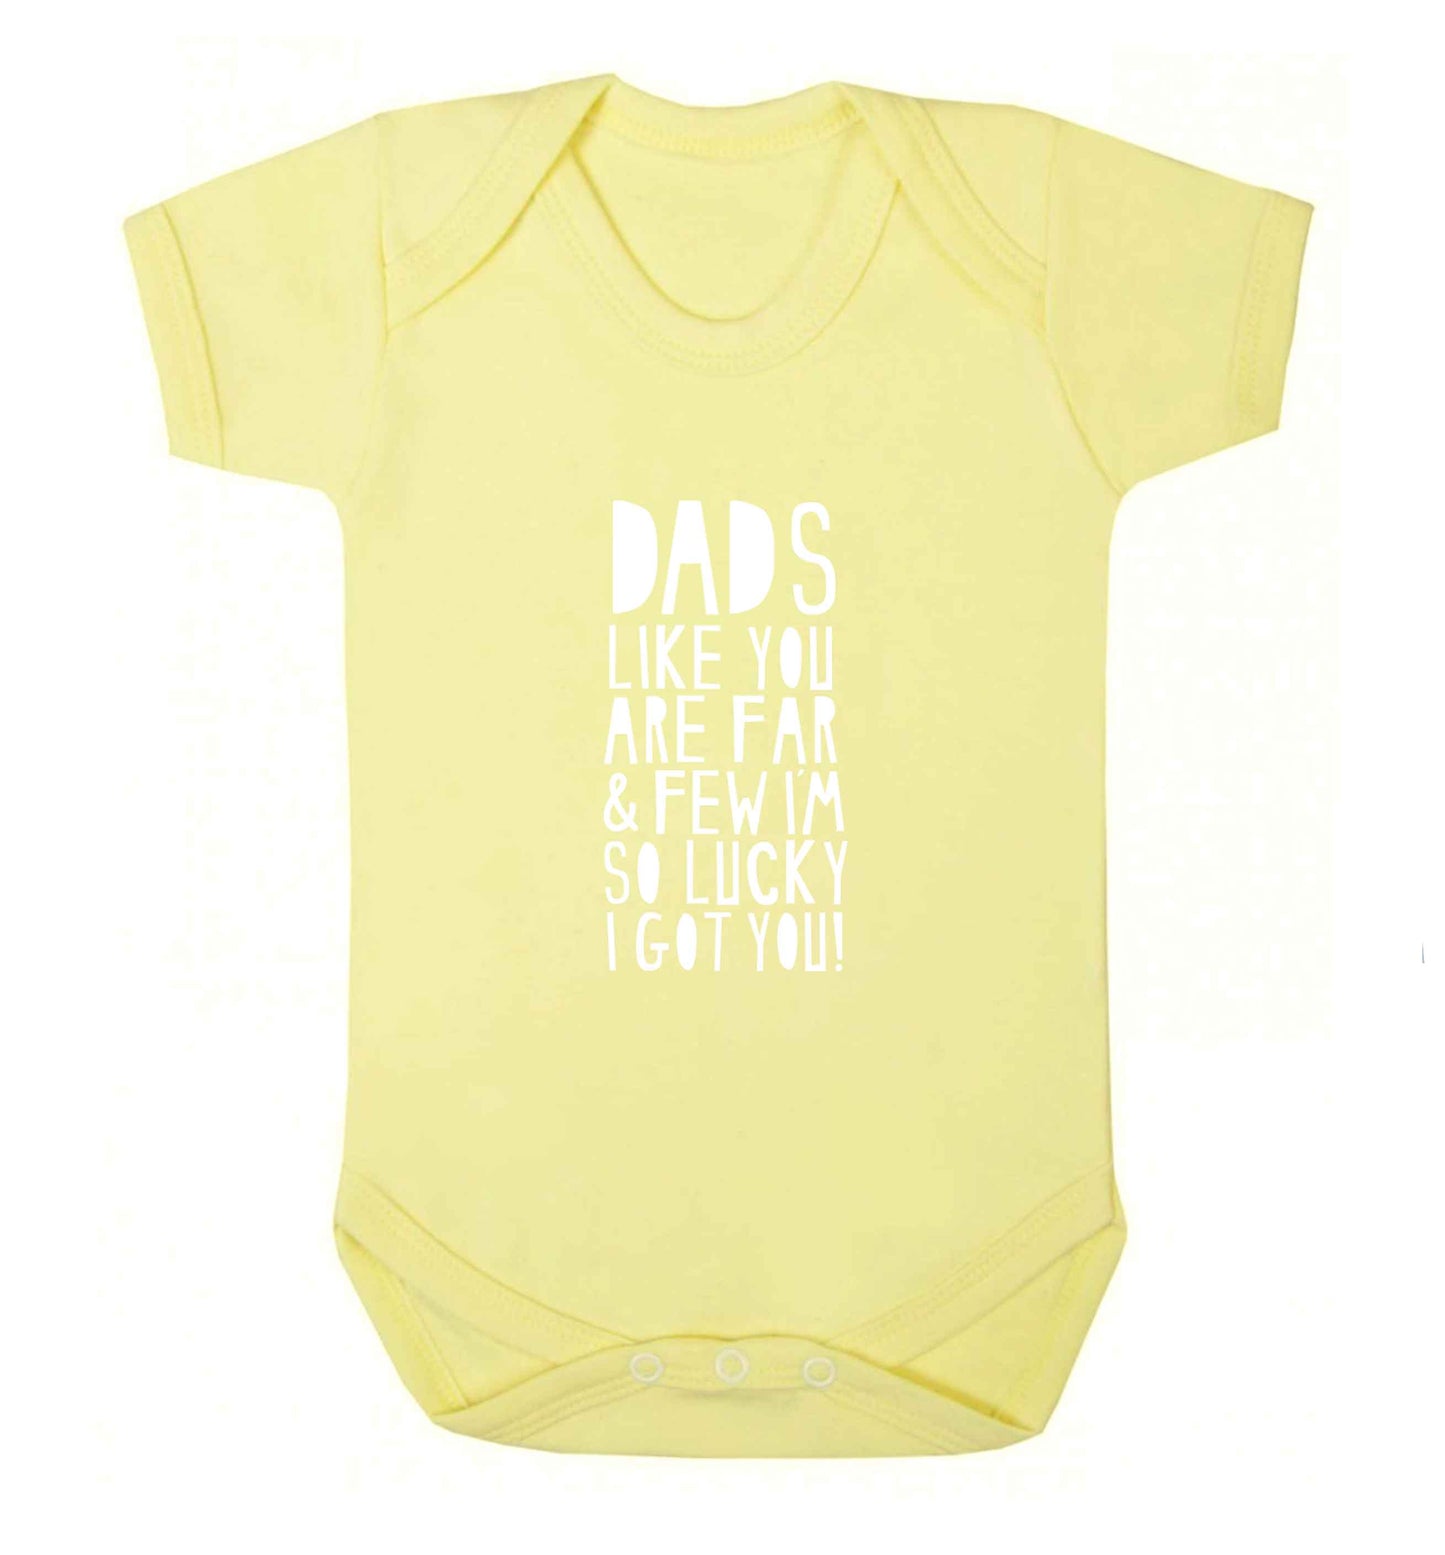 Dads like you are far and few I'm so luck I got you! baby vest pale yellow 18-24 months